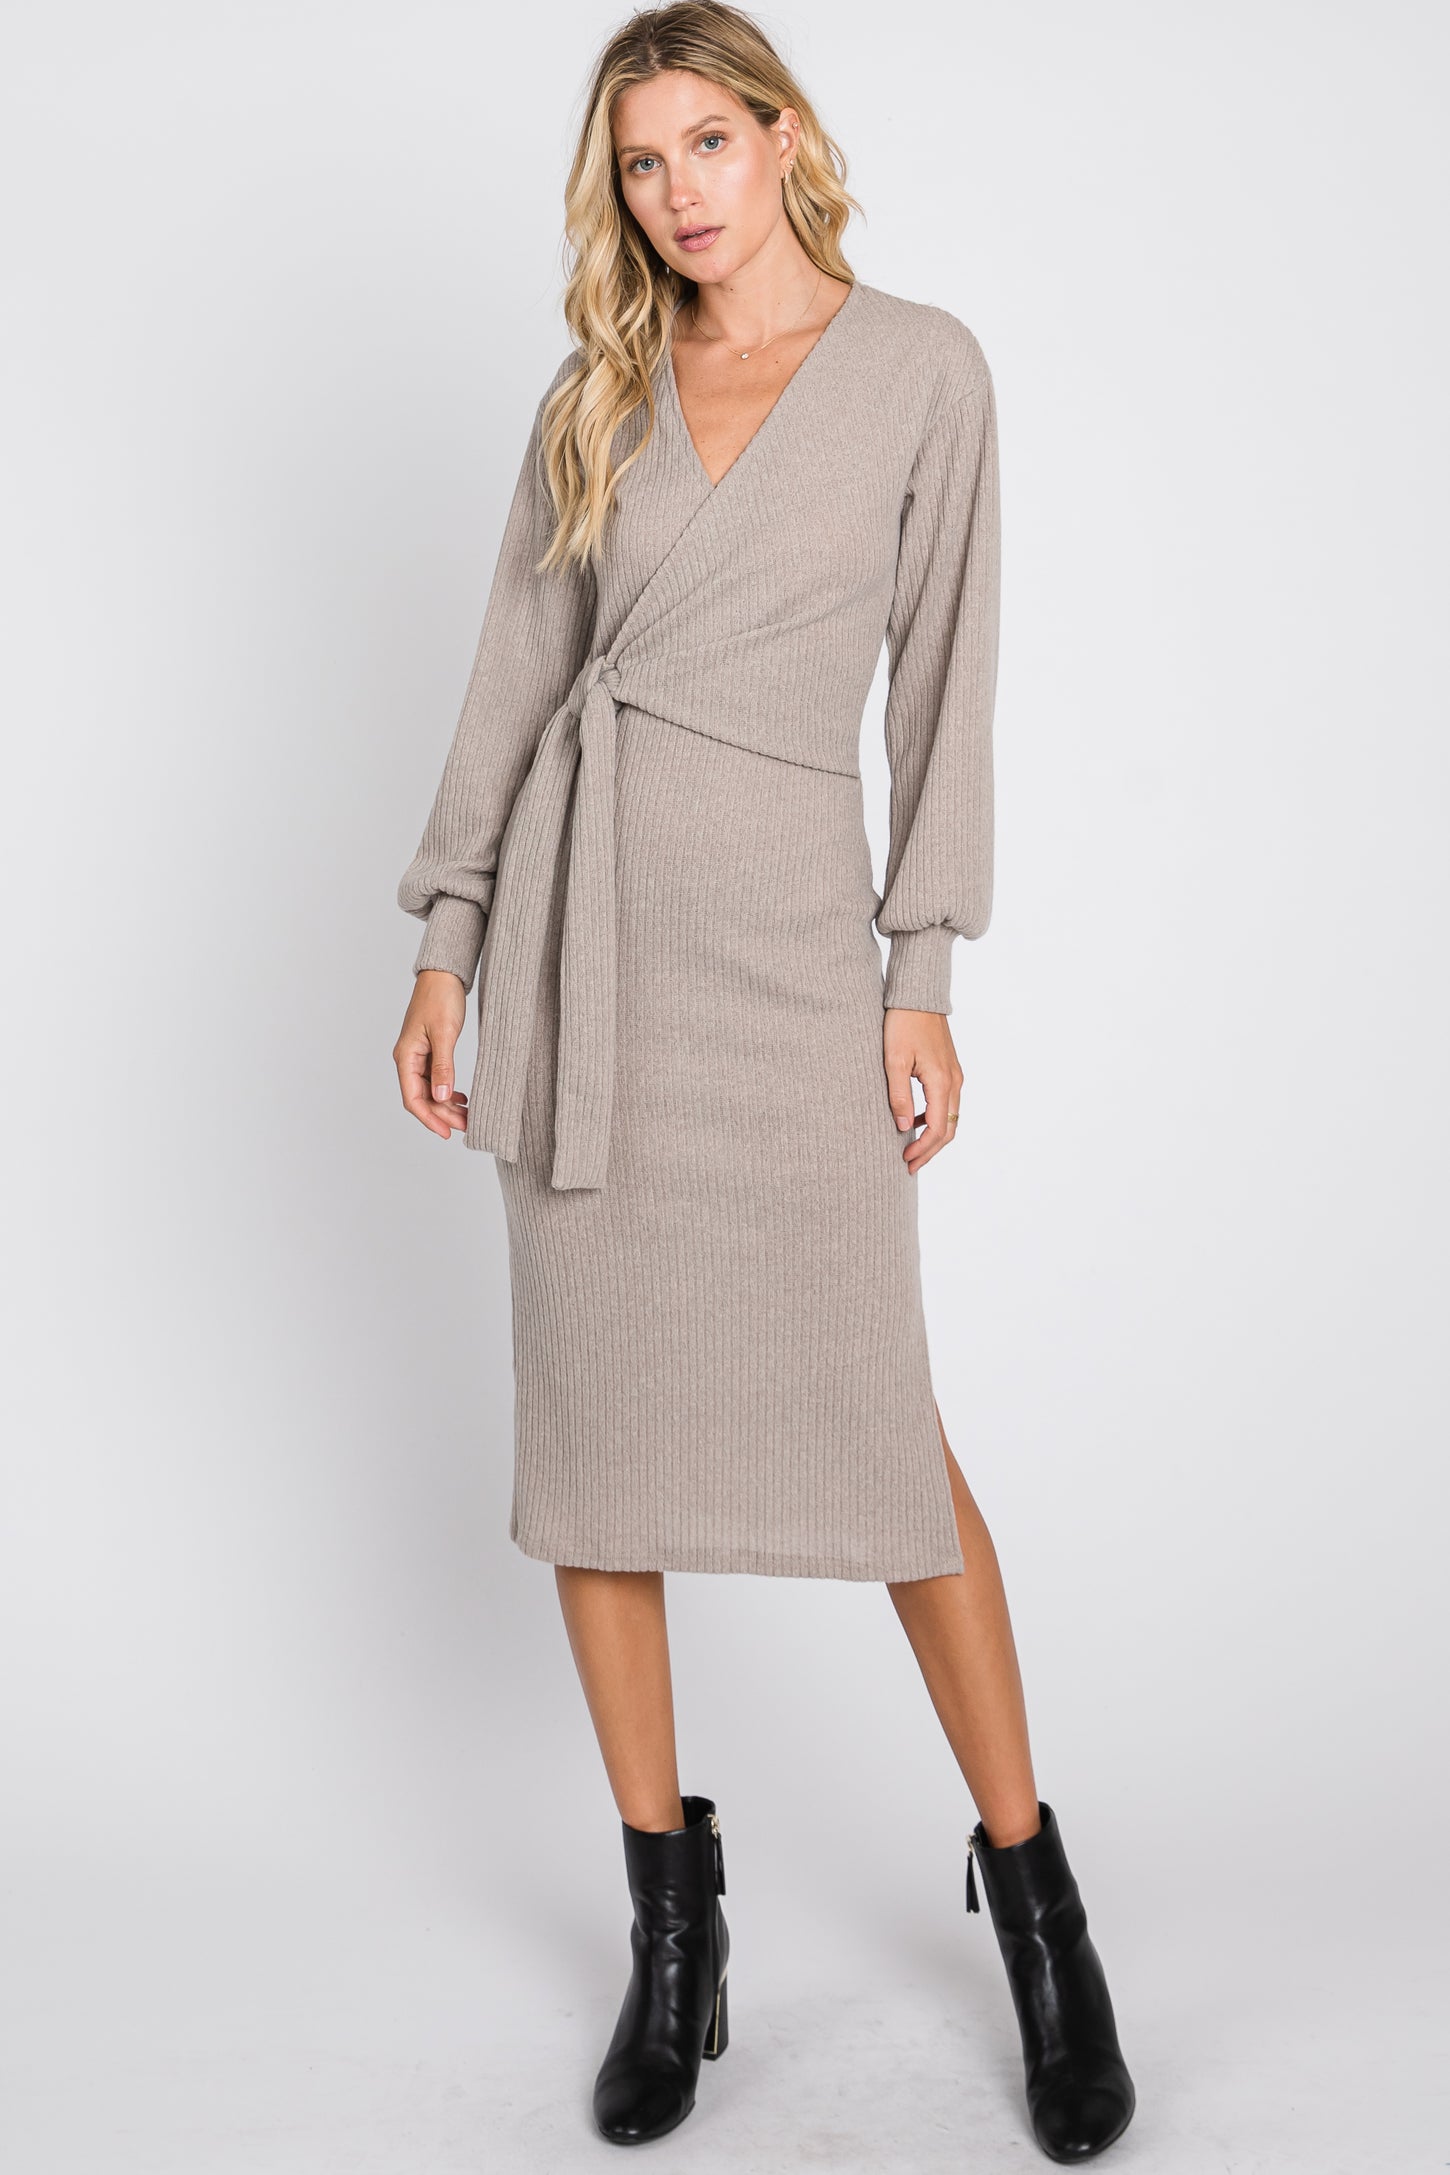 Taupe Brushed Wrap Front Tie Side Slit Maternity Midi Dress